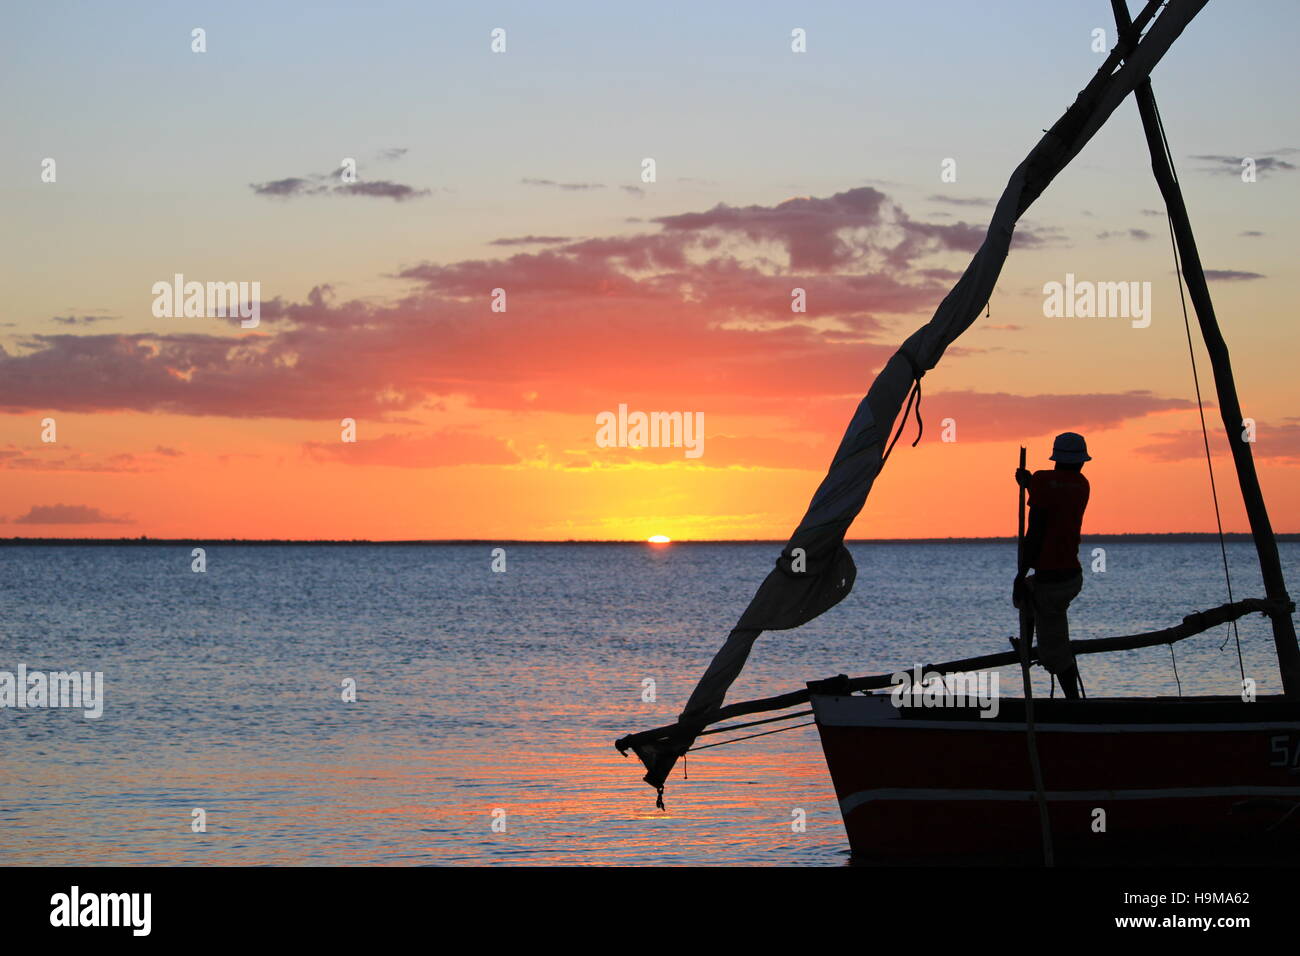 Silhouette an sunset, Mozambique Stock Photo